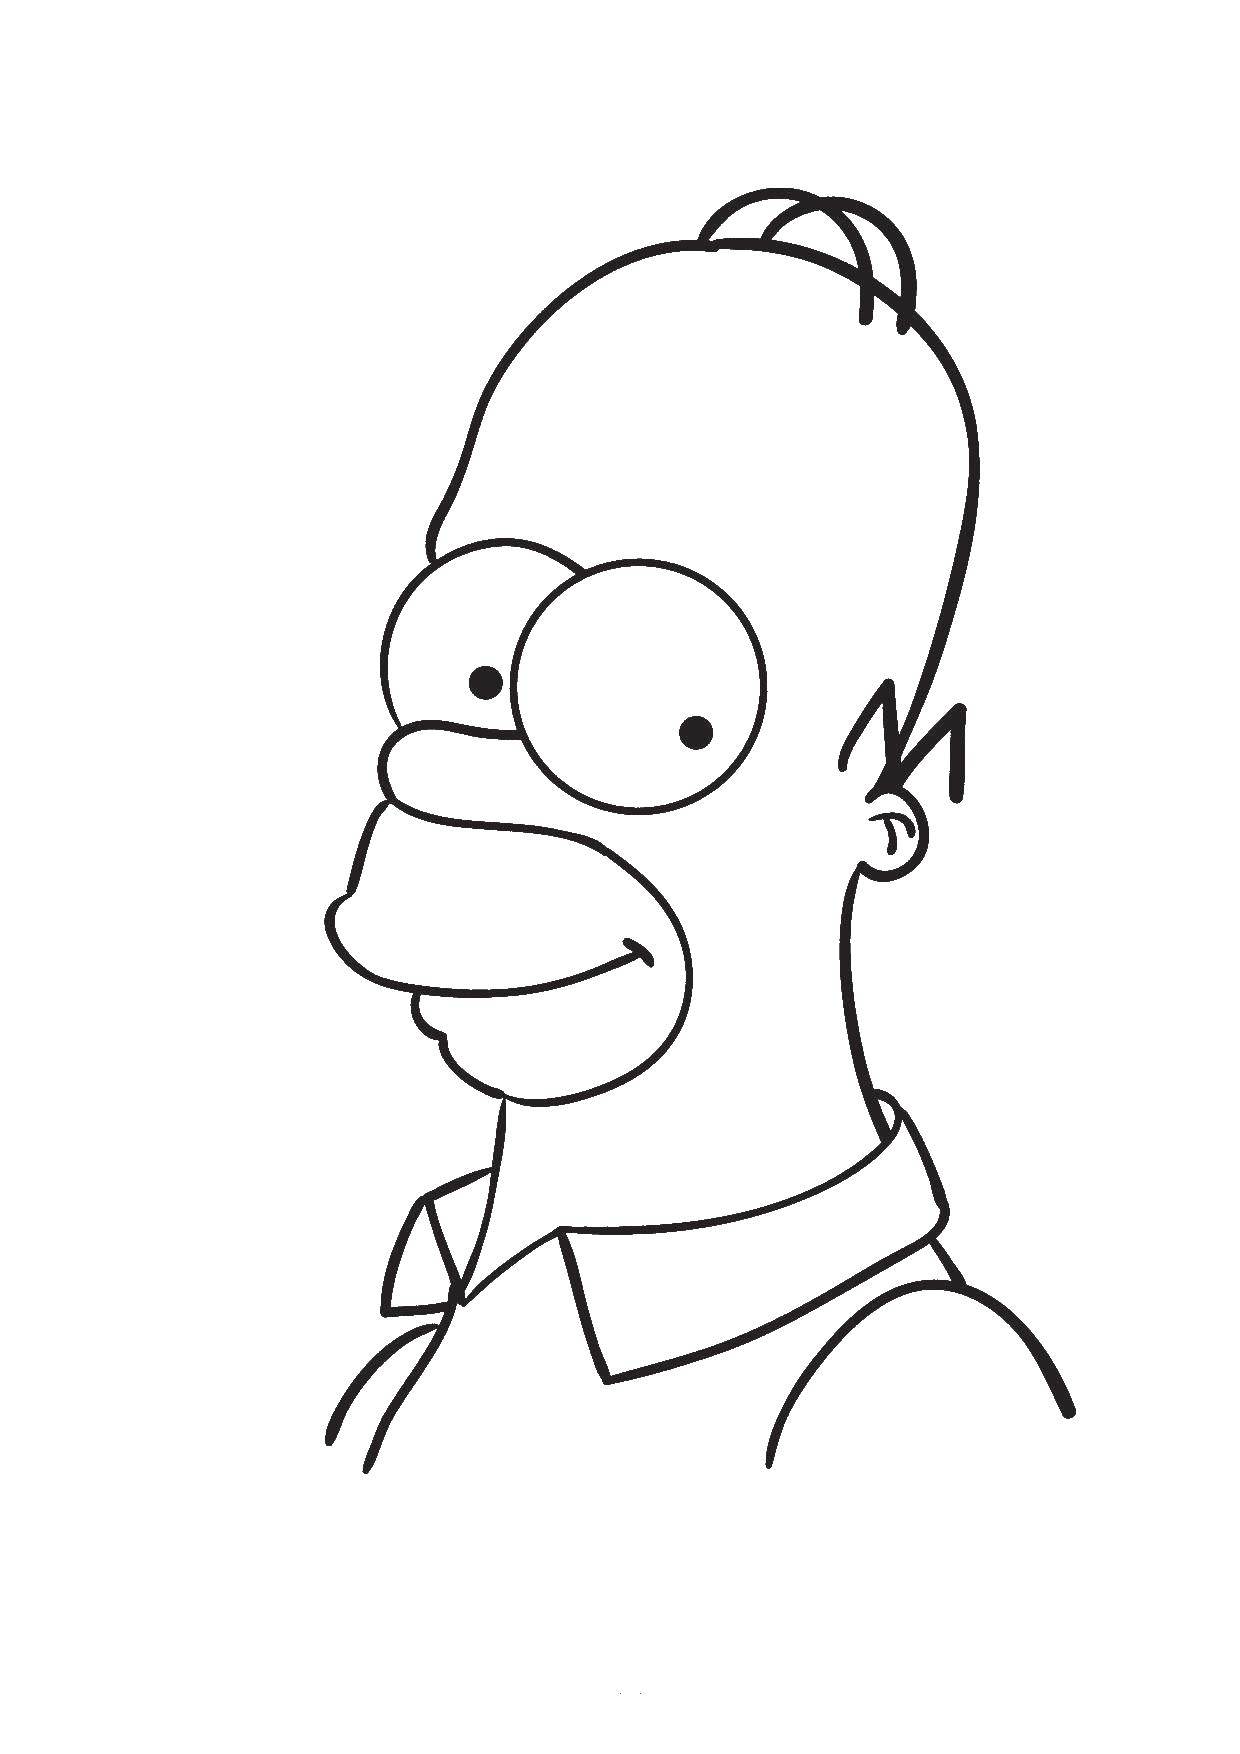 Coloring Homer Simpson. Category cartoons. Tags:  Cartoon character, Simpsons.